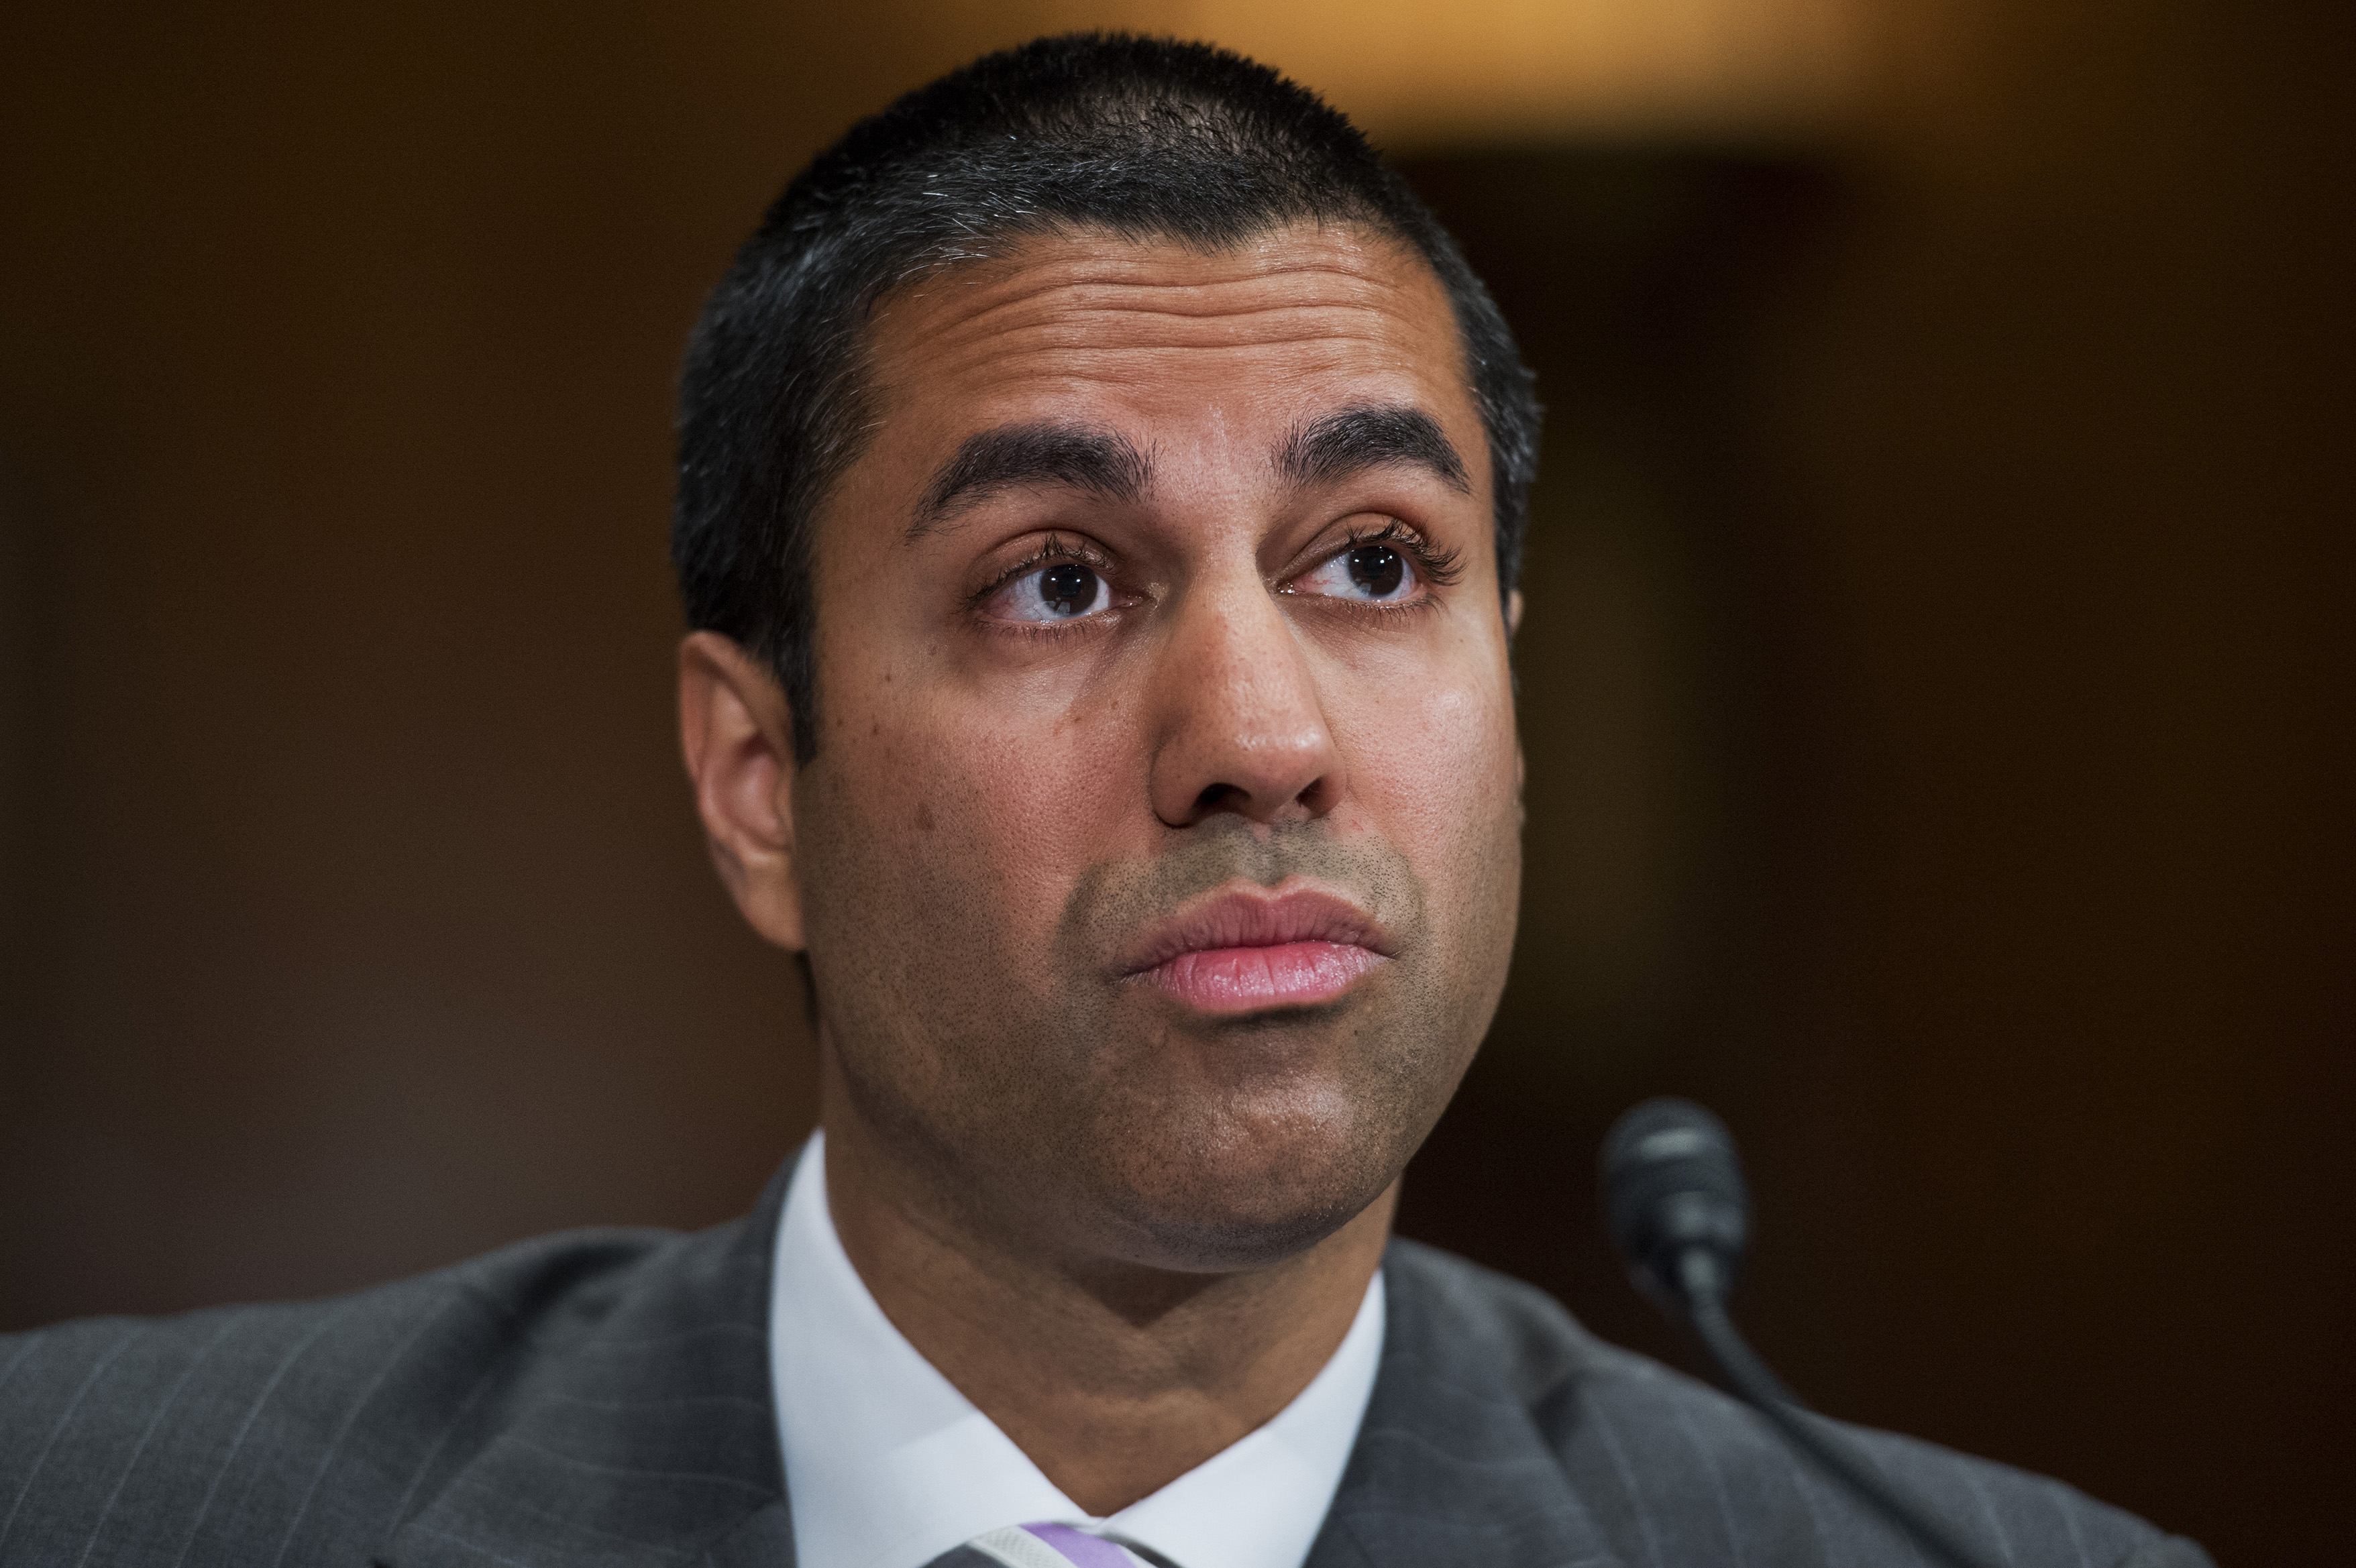 The FCC disproved its own claim that net neutrality was an Obama plot